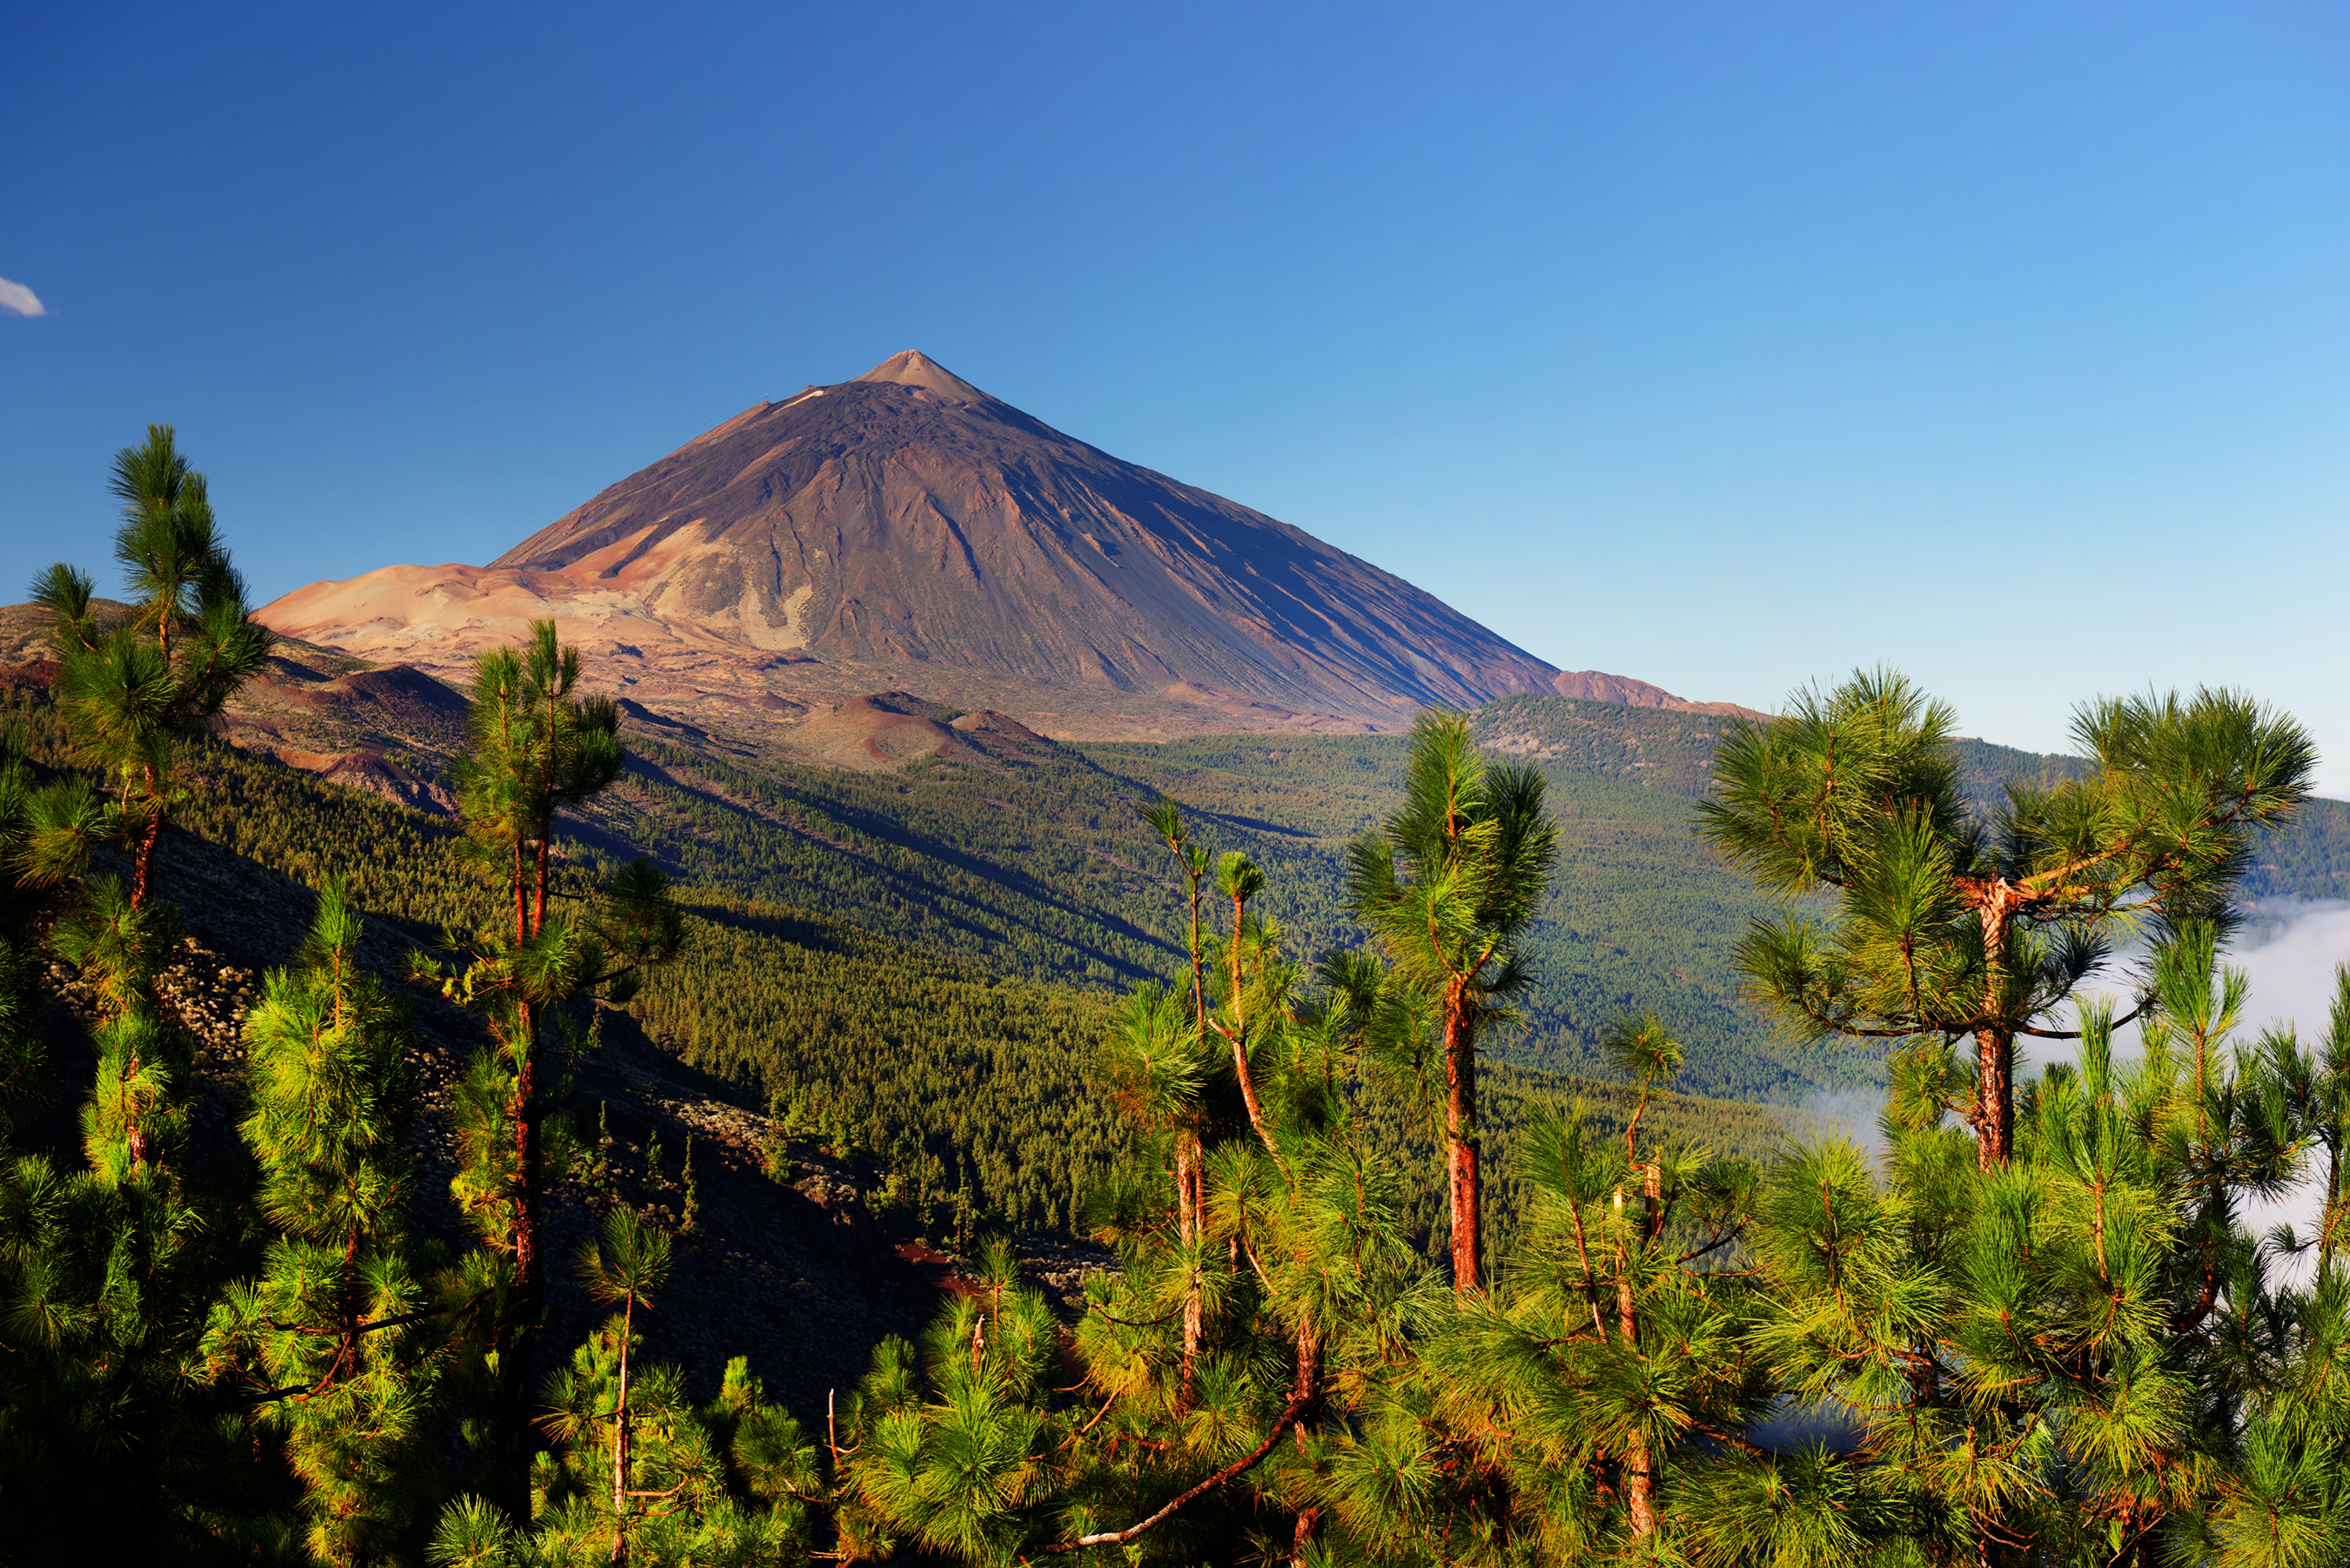 Mountain on the horizon in El Teide National park in Tenerife in the canaries